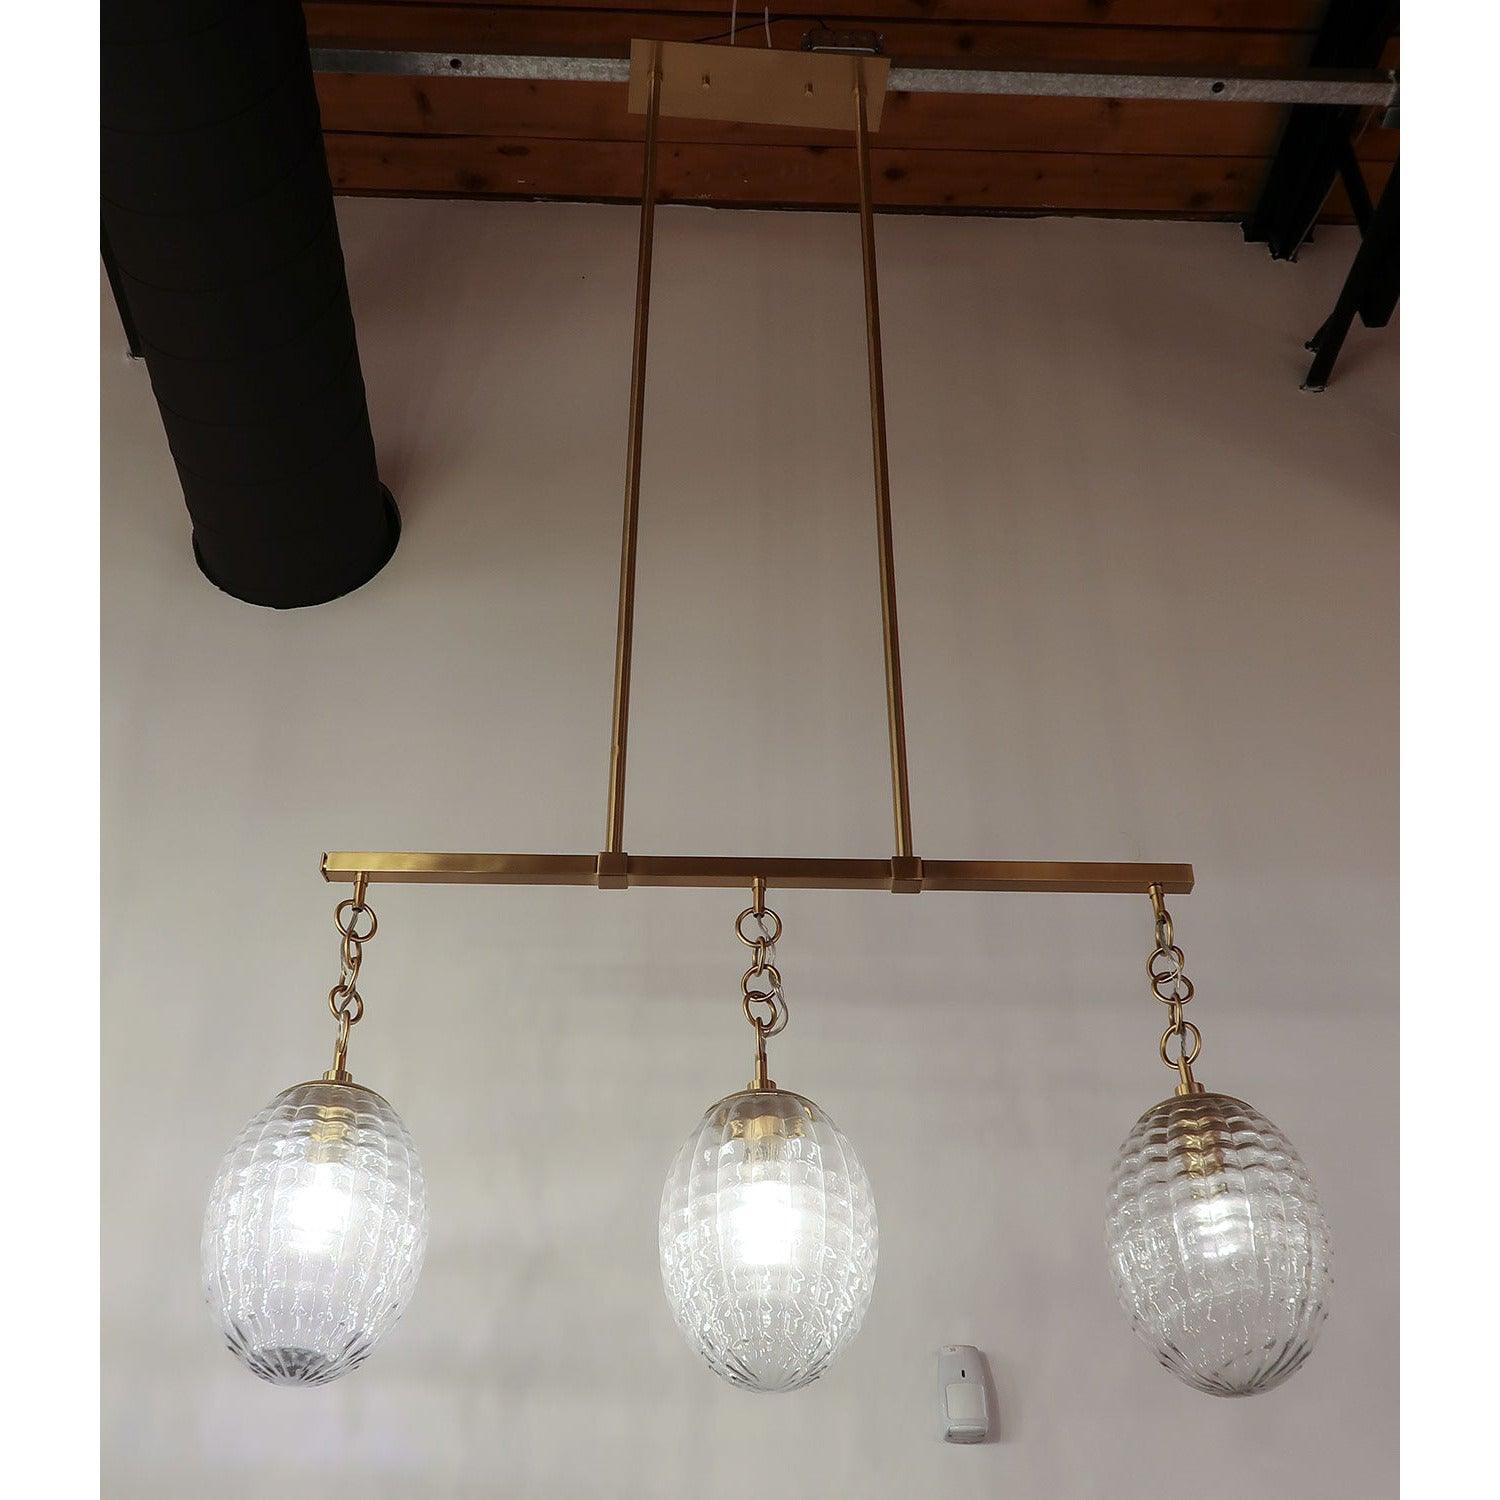 Montreal Lighting & Hardware - Venice Linear Pendant by Hudson Valley Lighting | OPEN BOX - 4940-AGB-OB | Montreal Lighting & Hardware